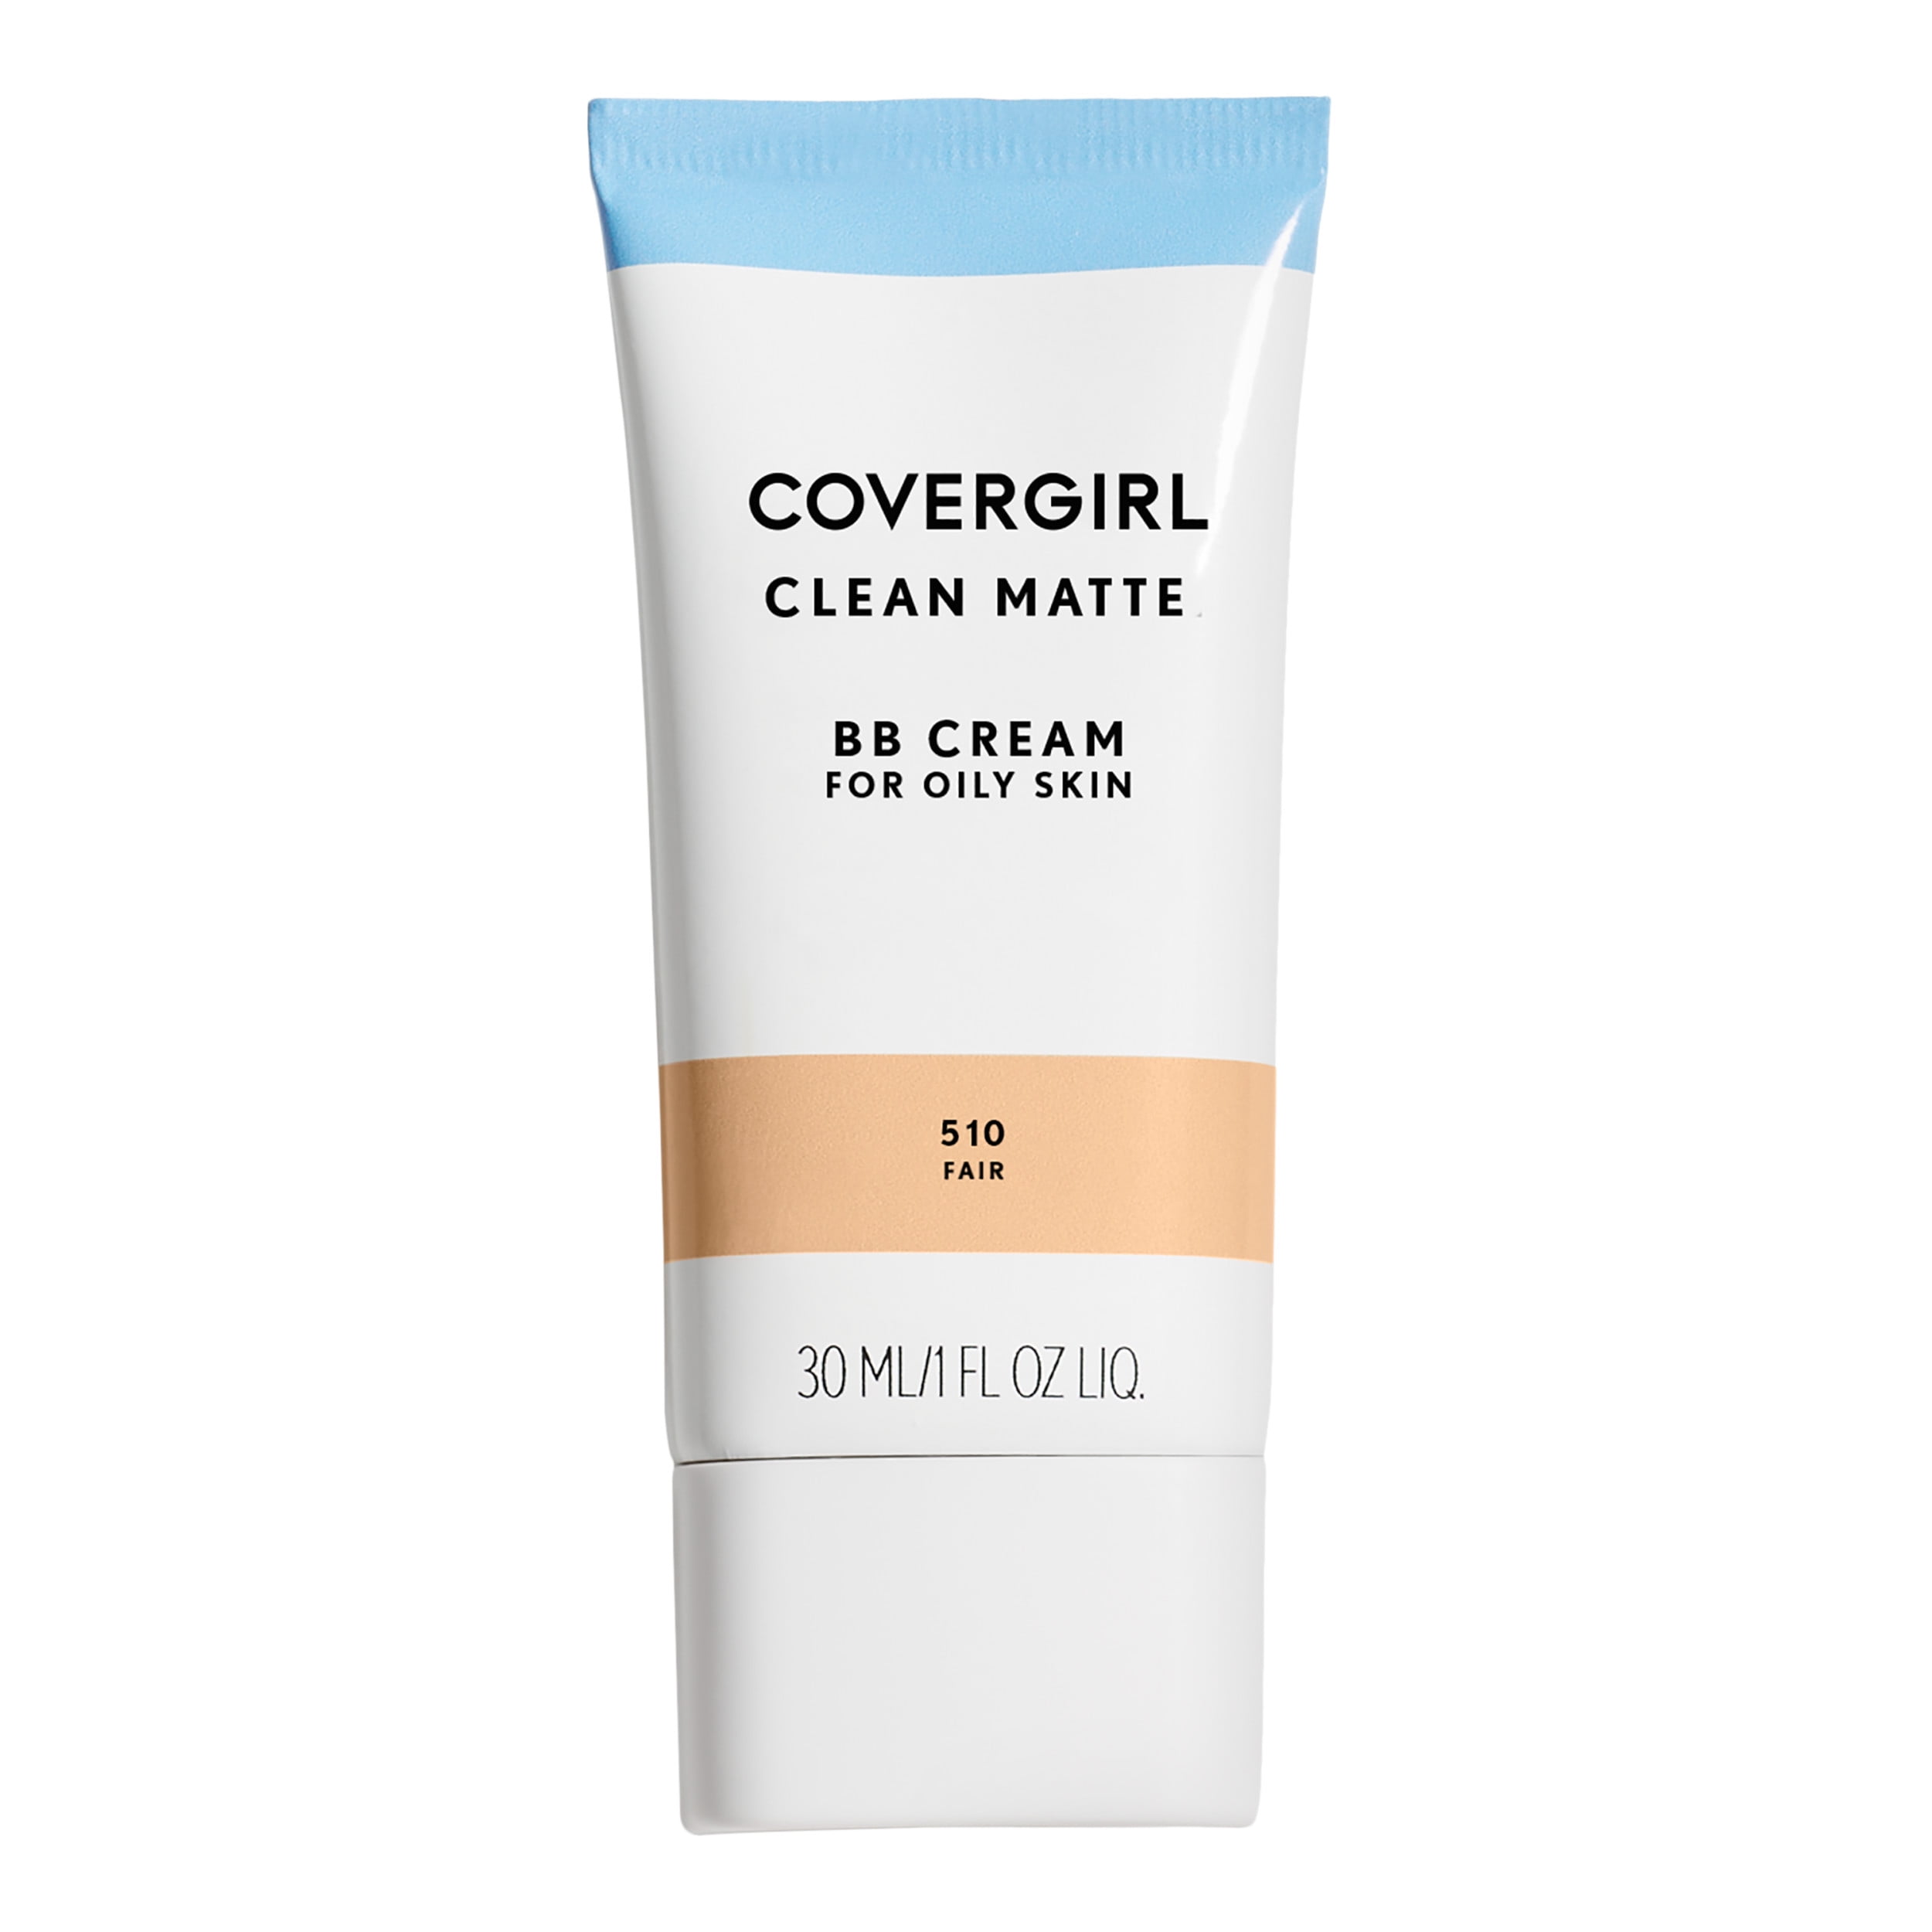 COVERGIRL Clean Matte BB Cream For Oily Skin, 510 Fair, 1 fl oz, Oil-Free Finish BB Cream, BB Cream Foundation, No Clogged Pores, Evens Skin Tone and Hides Blemishes, Water Based Foundation